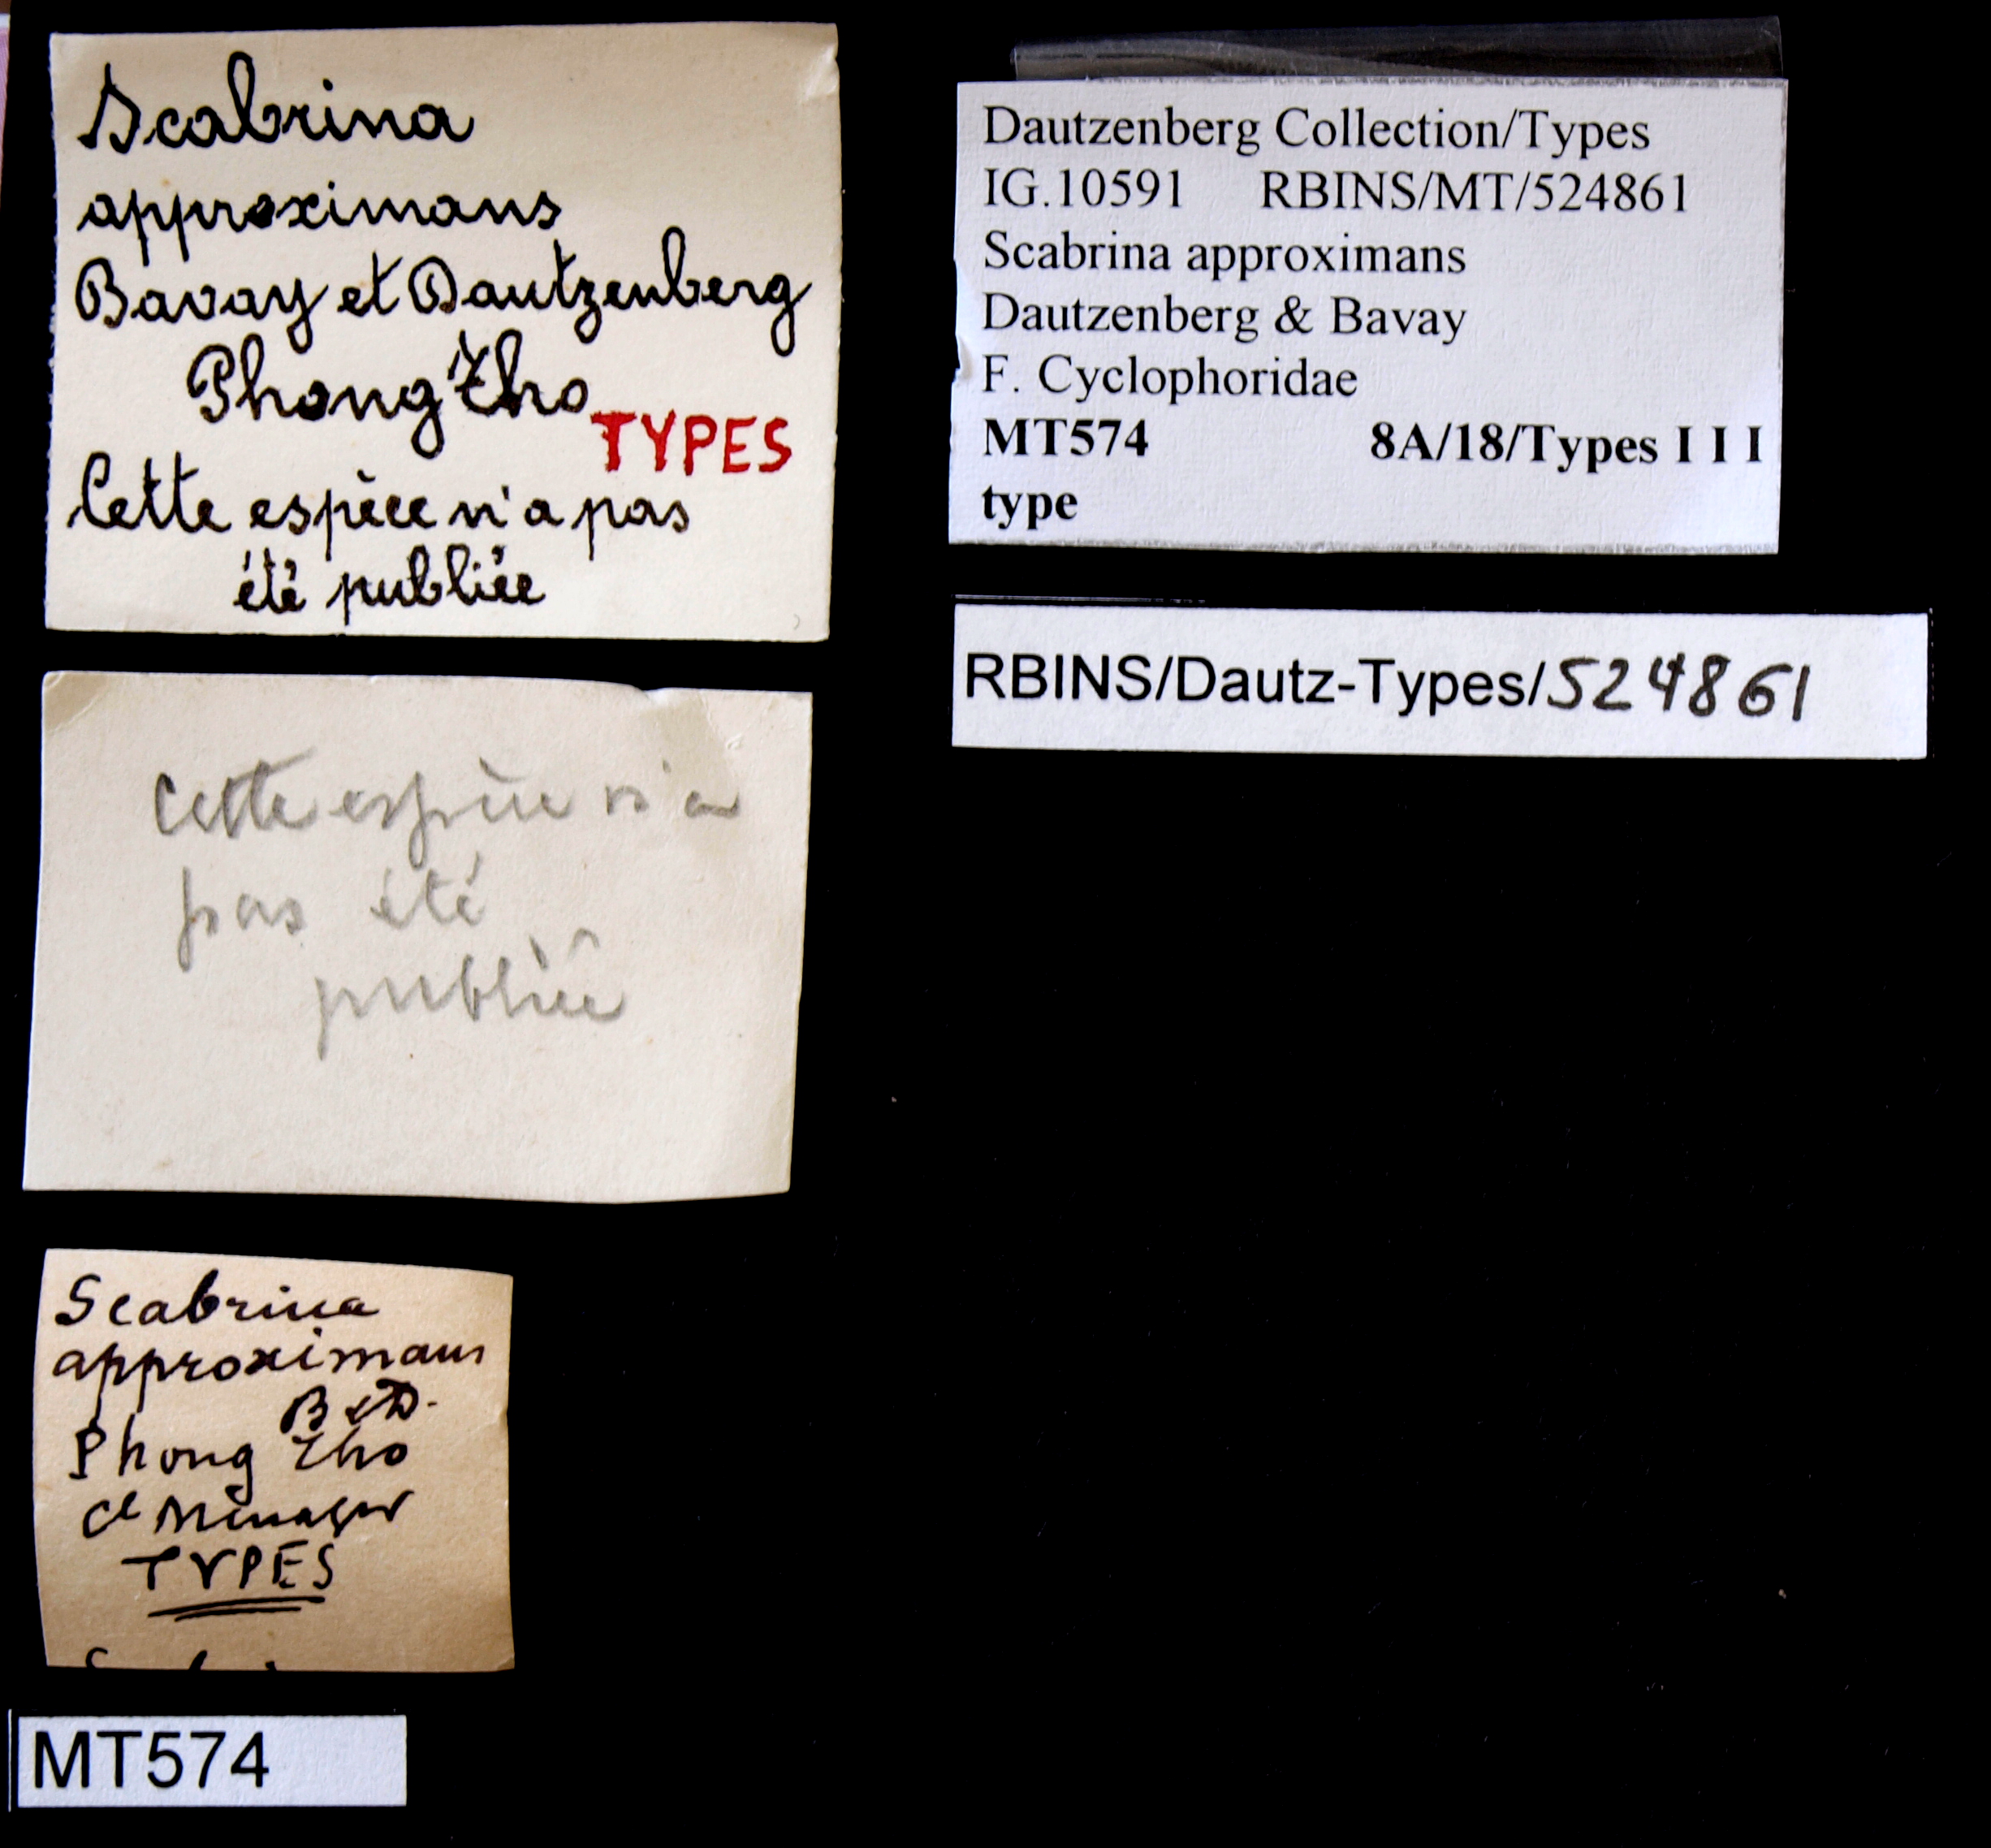 BE-RBINS-INV TYPE MT 574 Scabrina approximans LABELS.jpg